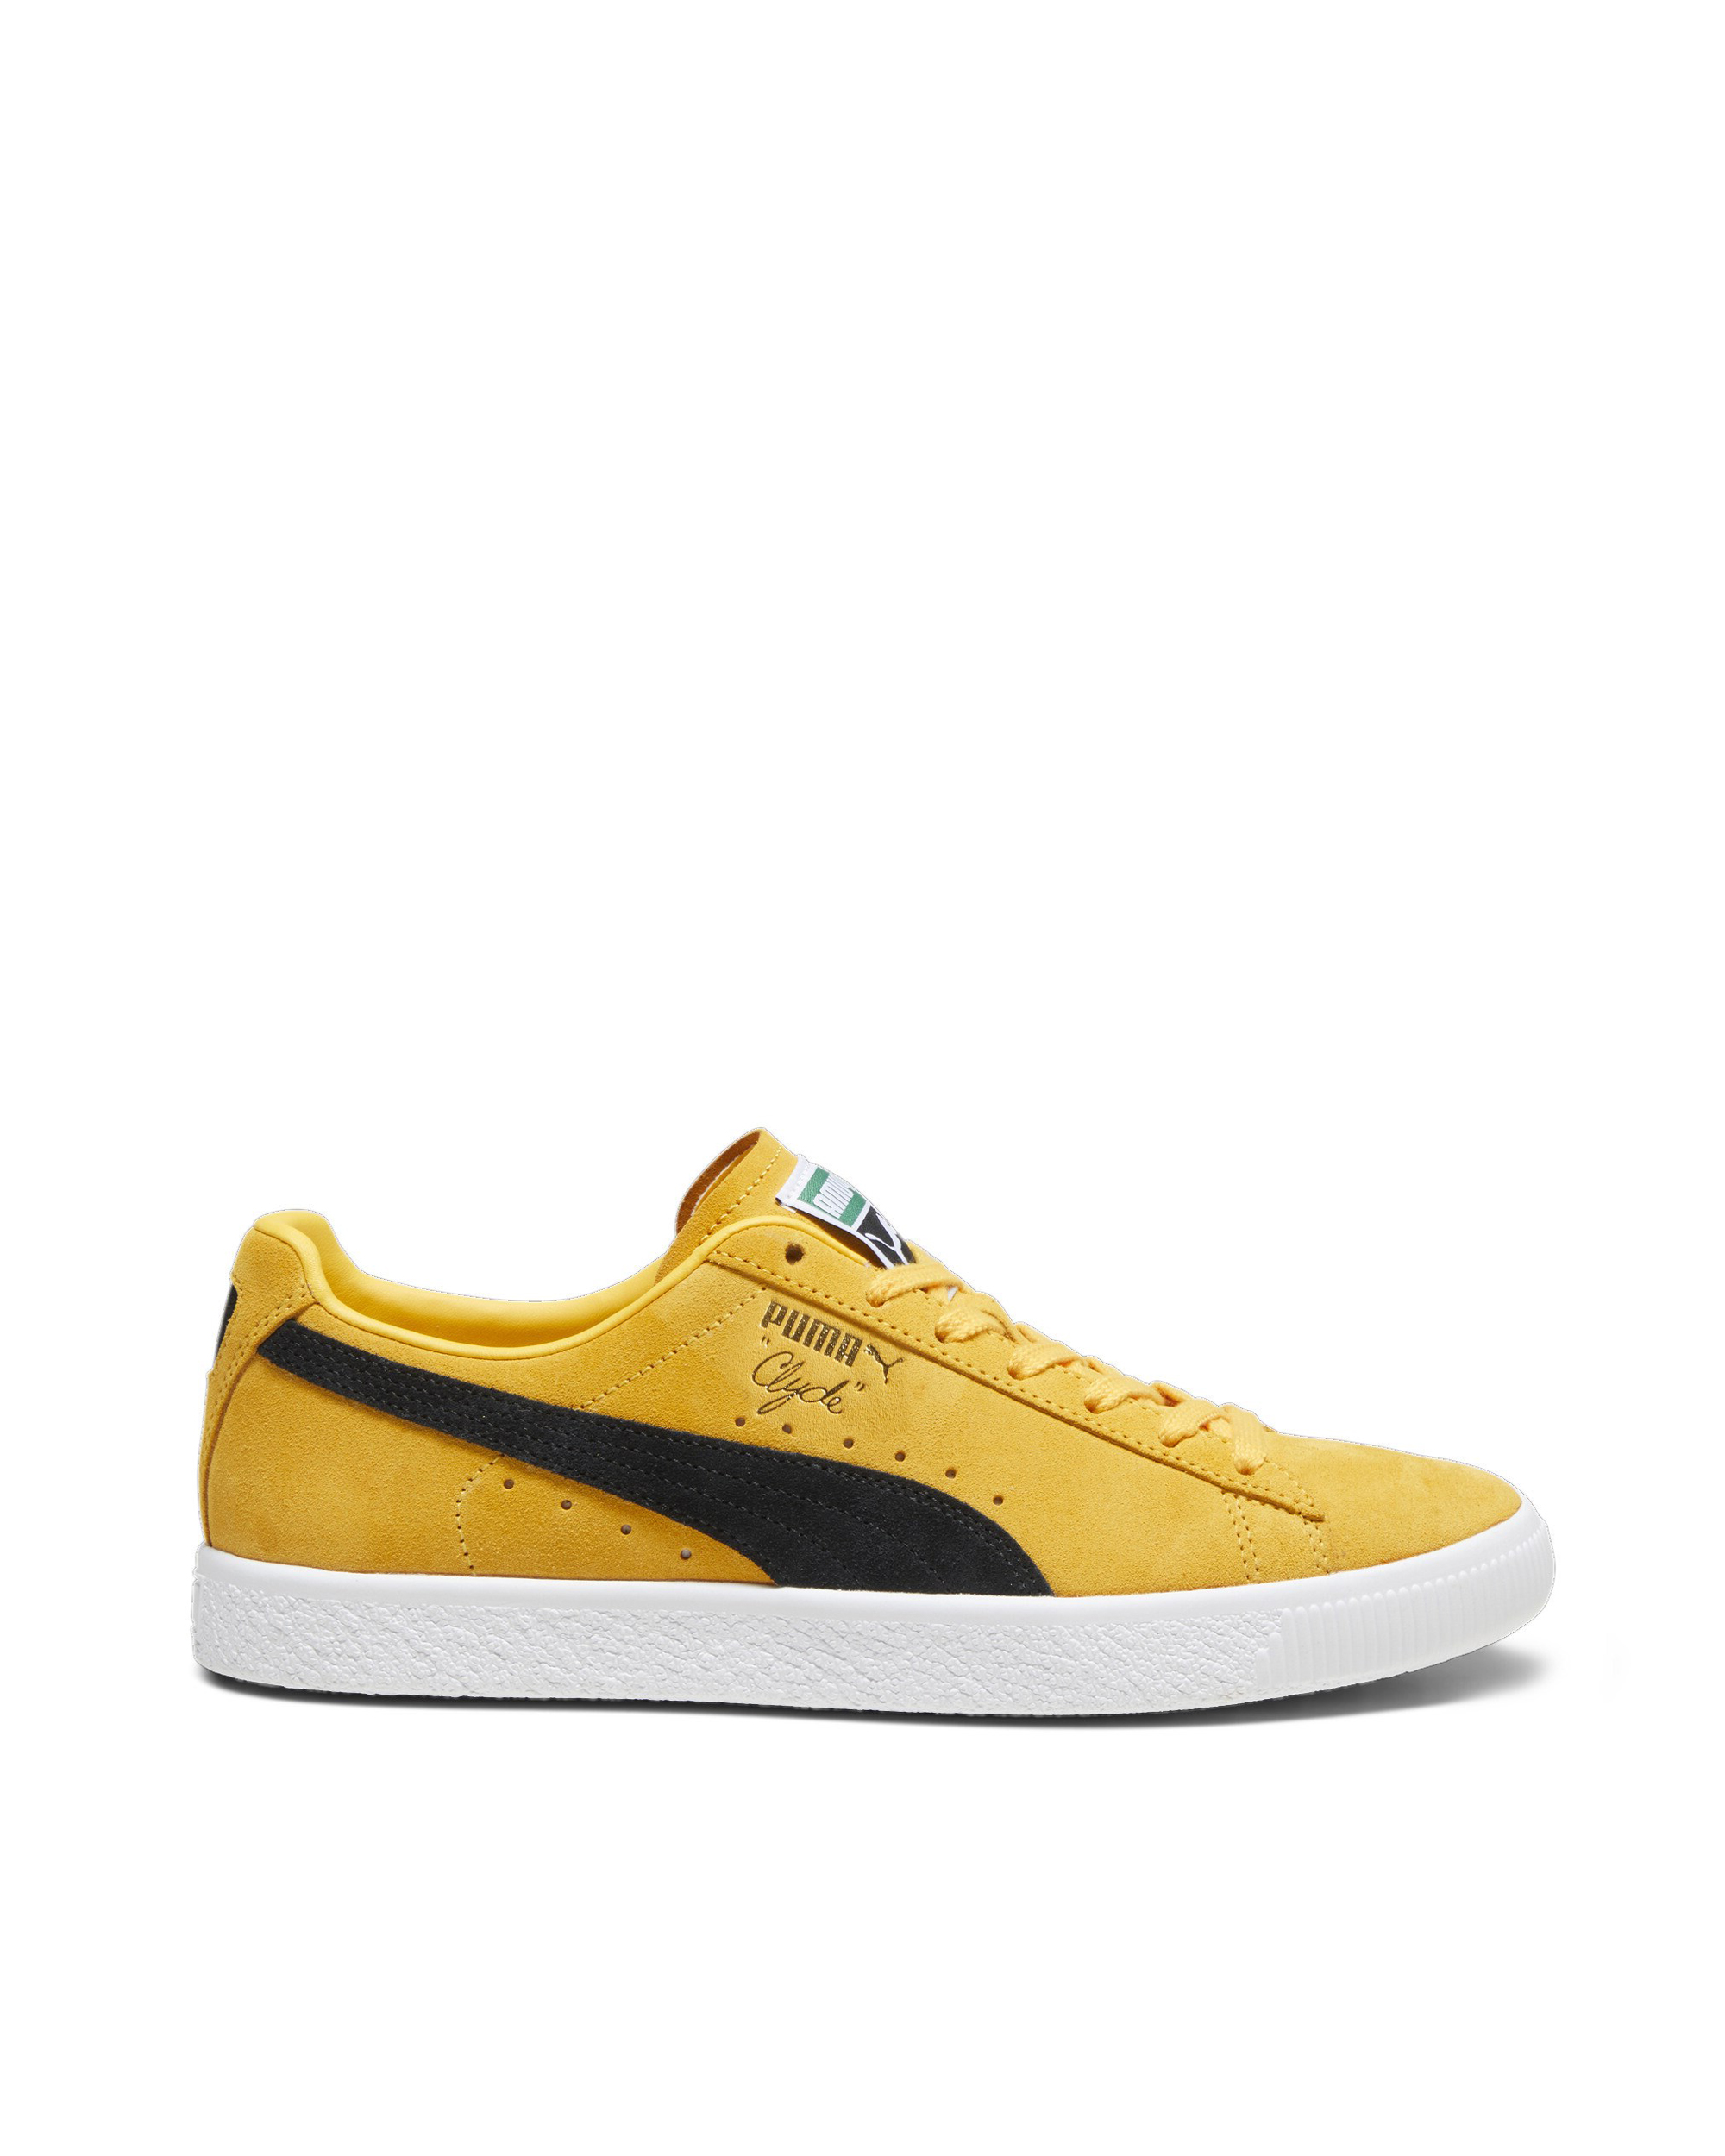 Shop Puma Sneaker Clyde Og Yellow Sizzle- Black In 07yellow Sizzle- Black